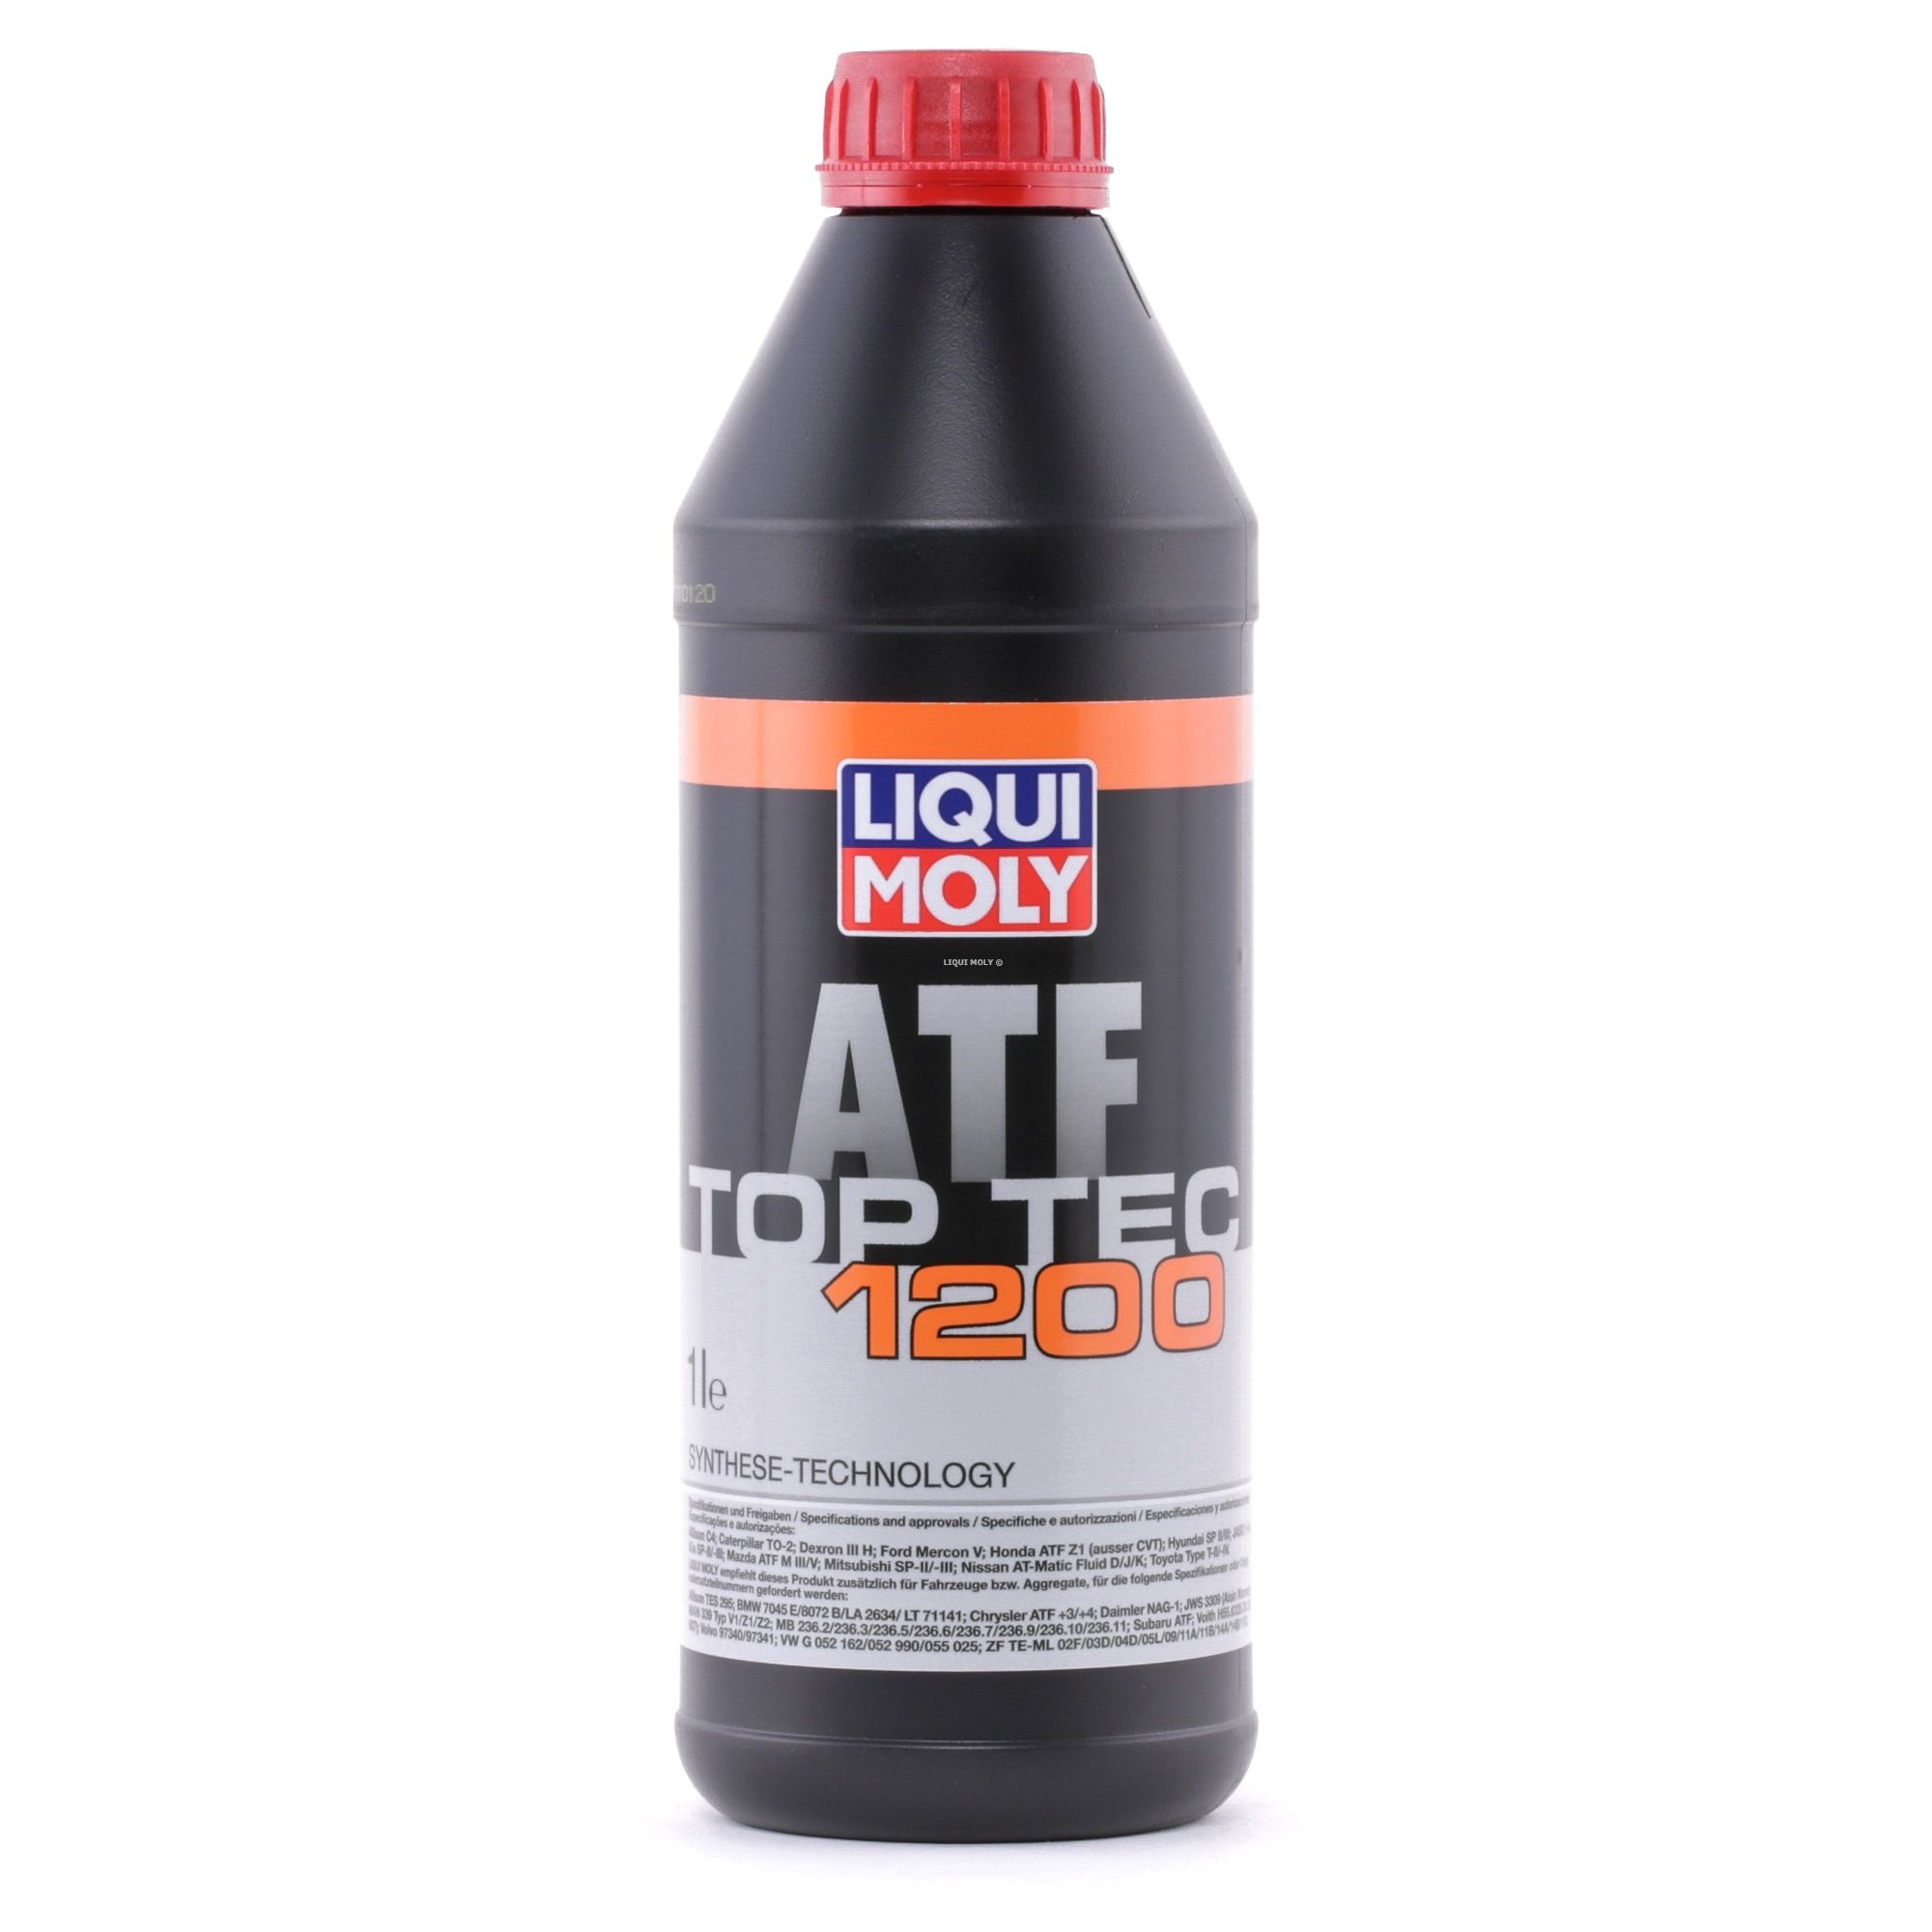 Volkswagen TOUAREG Propshafts and differentials parts - Automatic transmission fluid LIQUI MOLY 3681